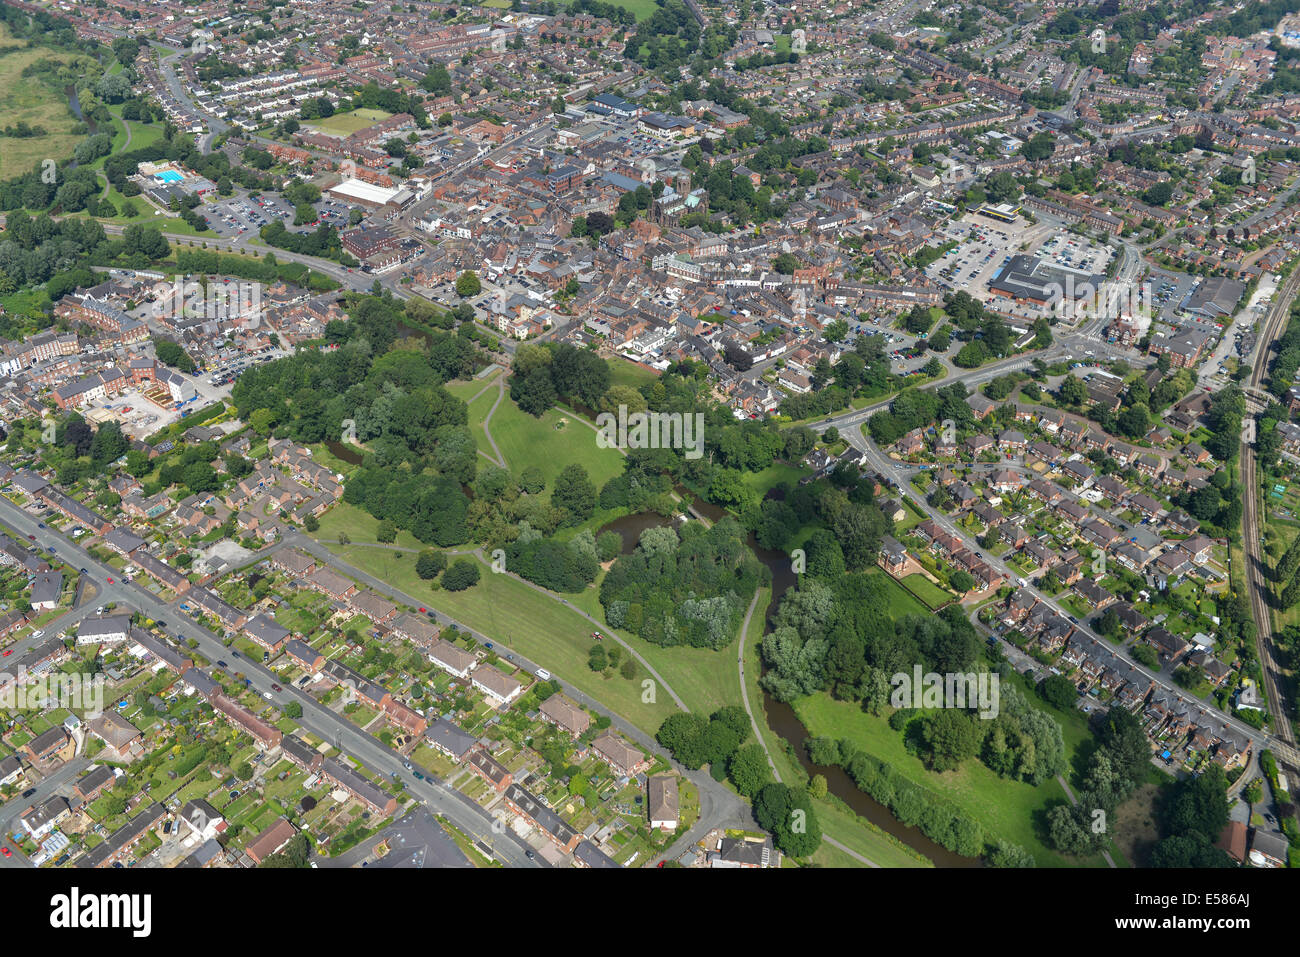 An aerial image showing the town centre of Nantwich in Cheshire, UK Stock Photo